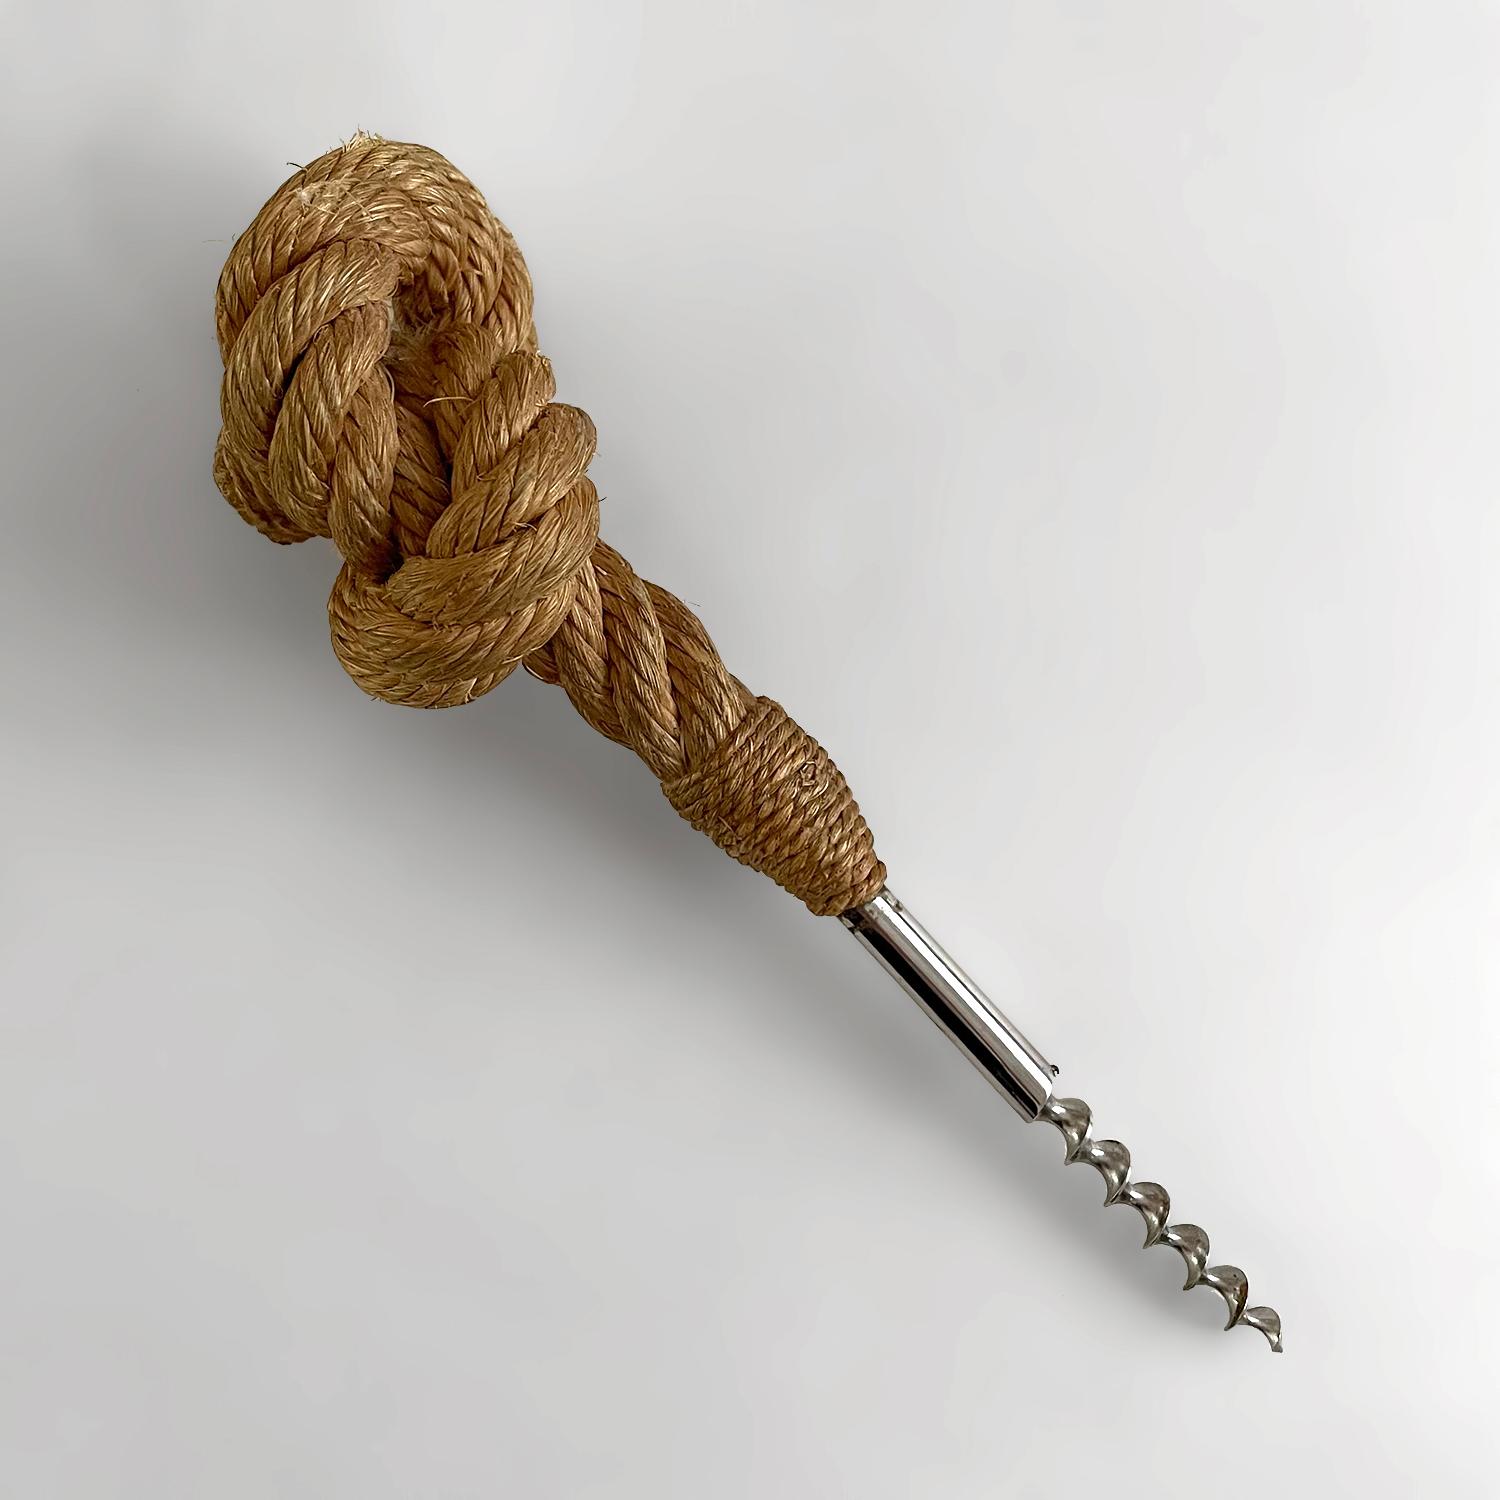 Audoux Minet wine opener
France, circa 1950’s
Signature coiled rope with oversized knot trim
Patina from age and use
We have a large collection of Audoux-Minet pieces, please see other listings 